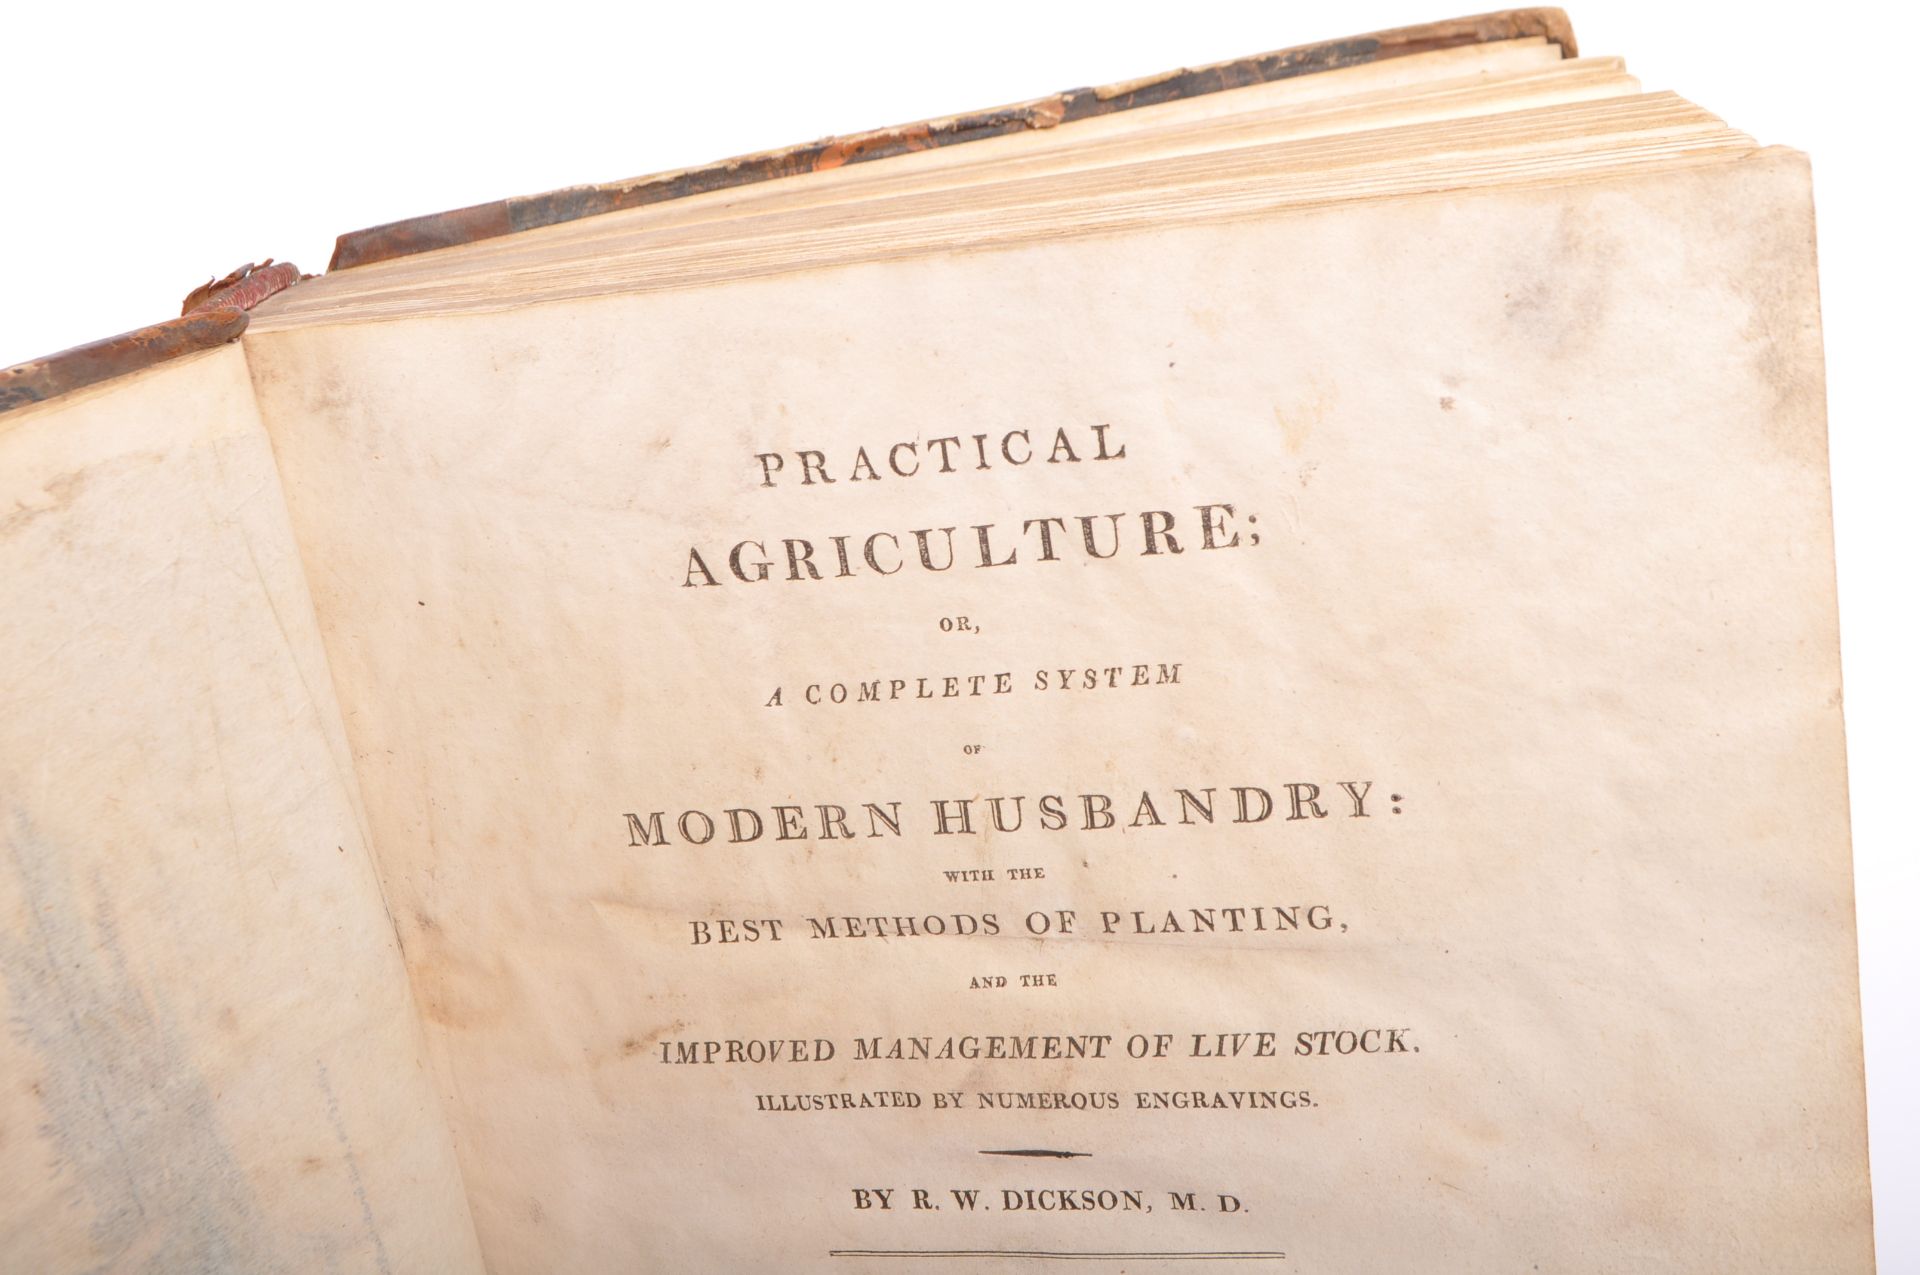 EARLY 19TH CENTURY R. W. DICKSON PRACTICAL AGRICULTURE BOOK - Image 4 of 6